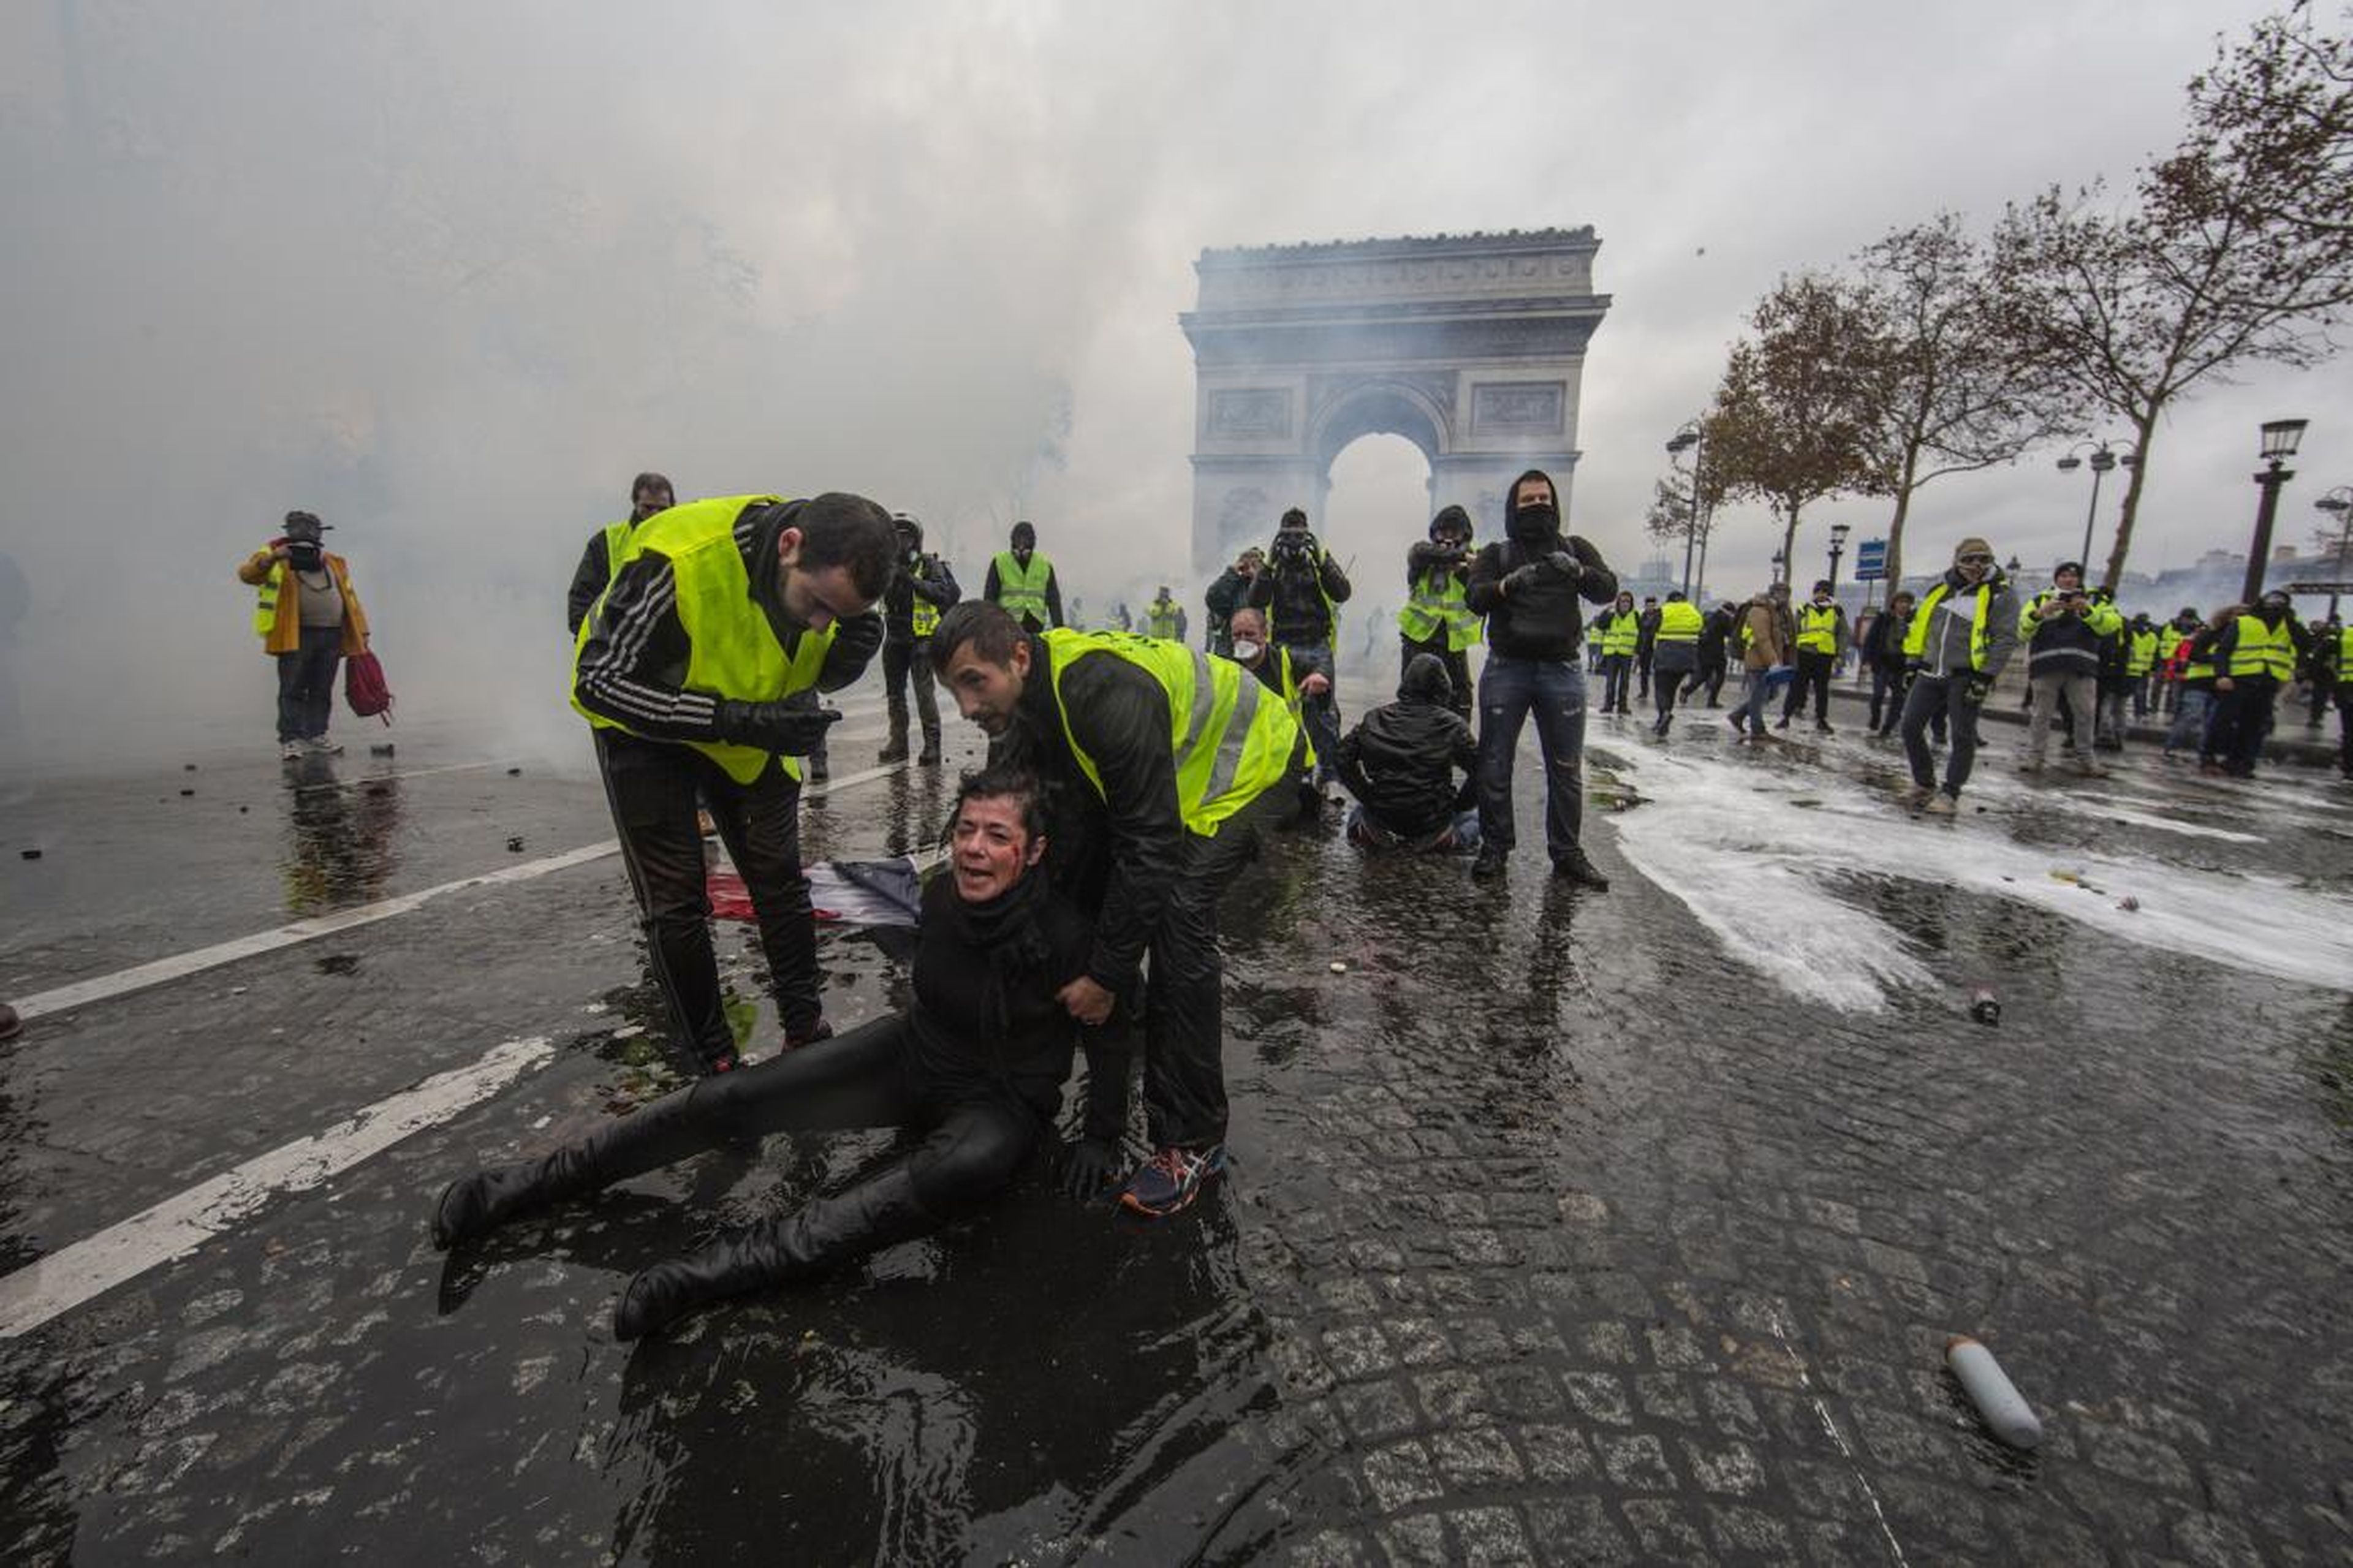 A woman was wounded by a water canon as protesters clashed with the police.